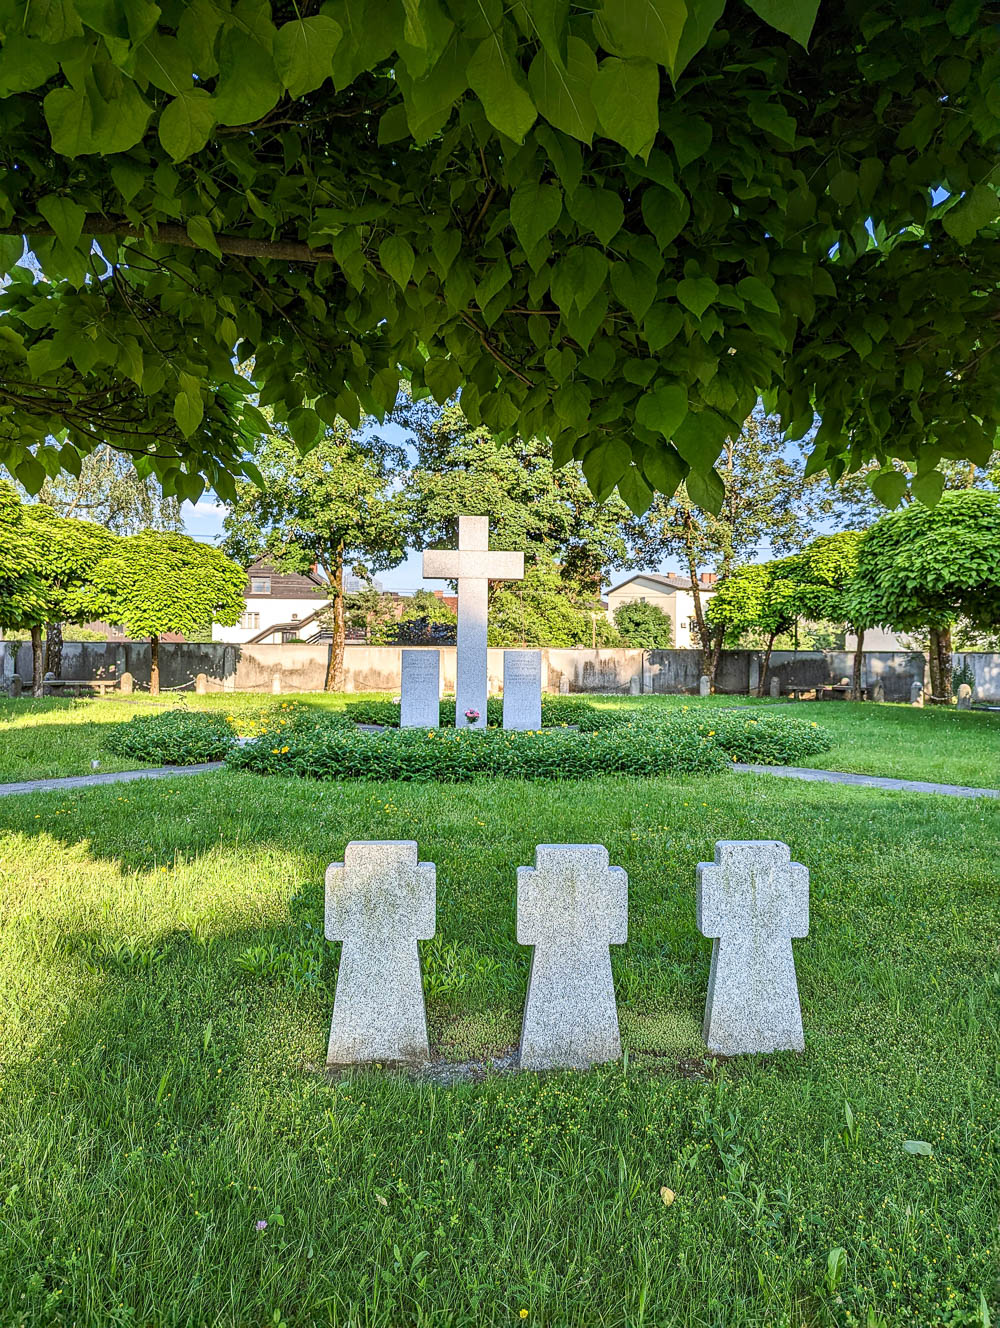 large cross memorial and small cross grave markers under a tree